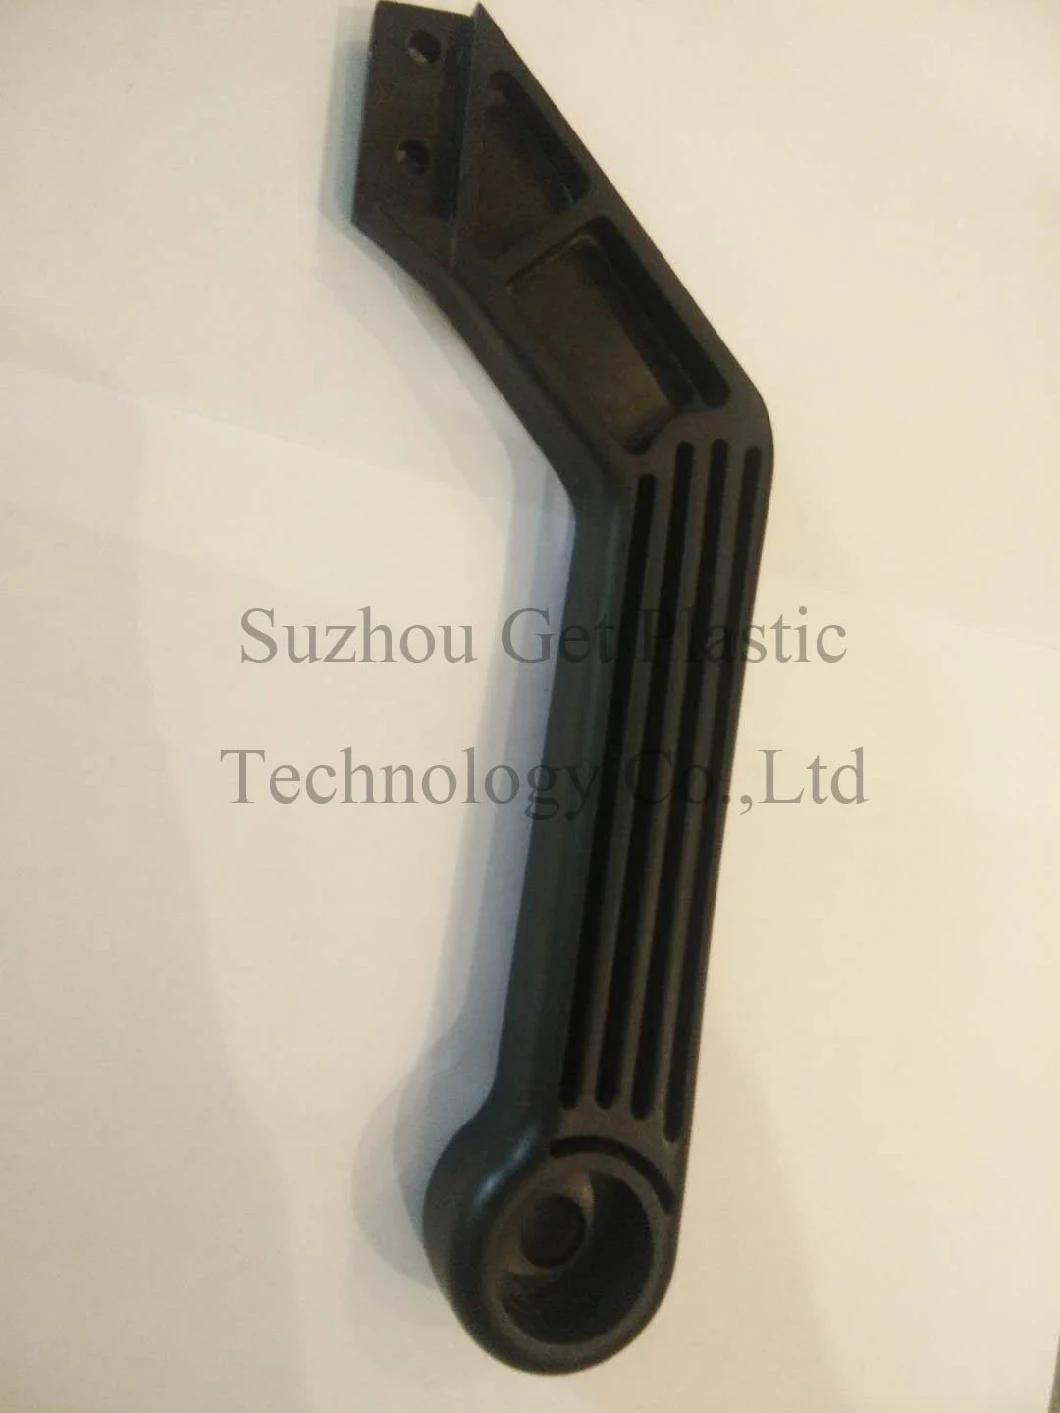 Advanced Plastic Mold Parts Use for Industry Field